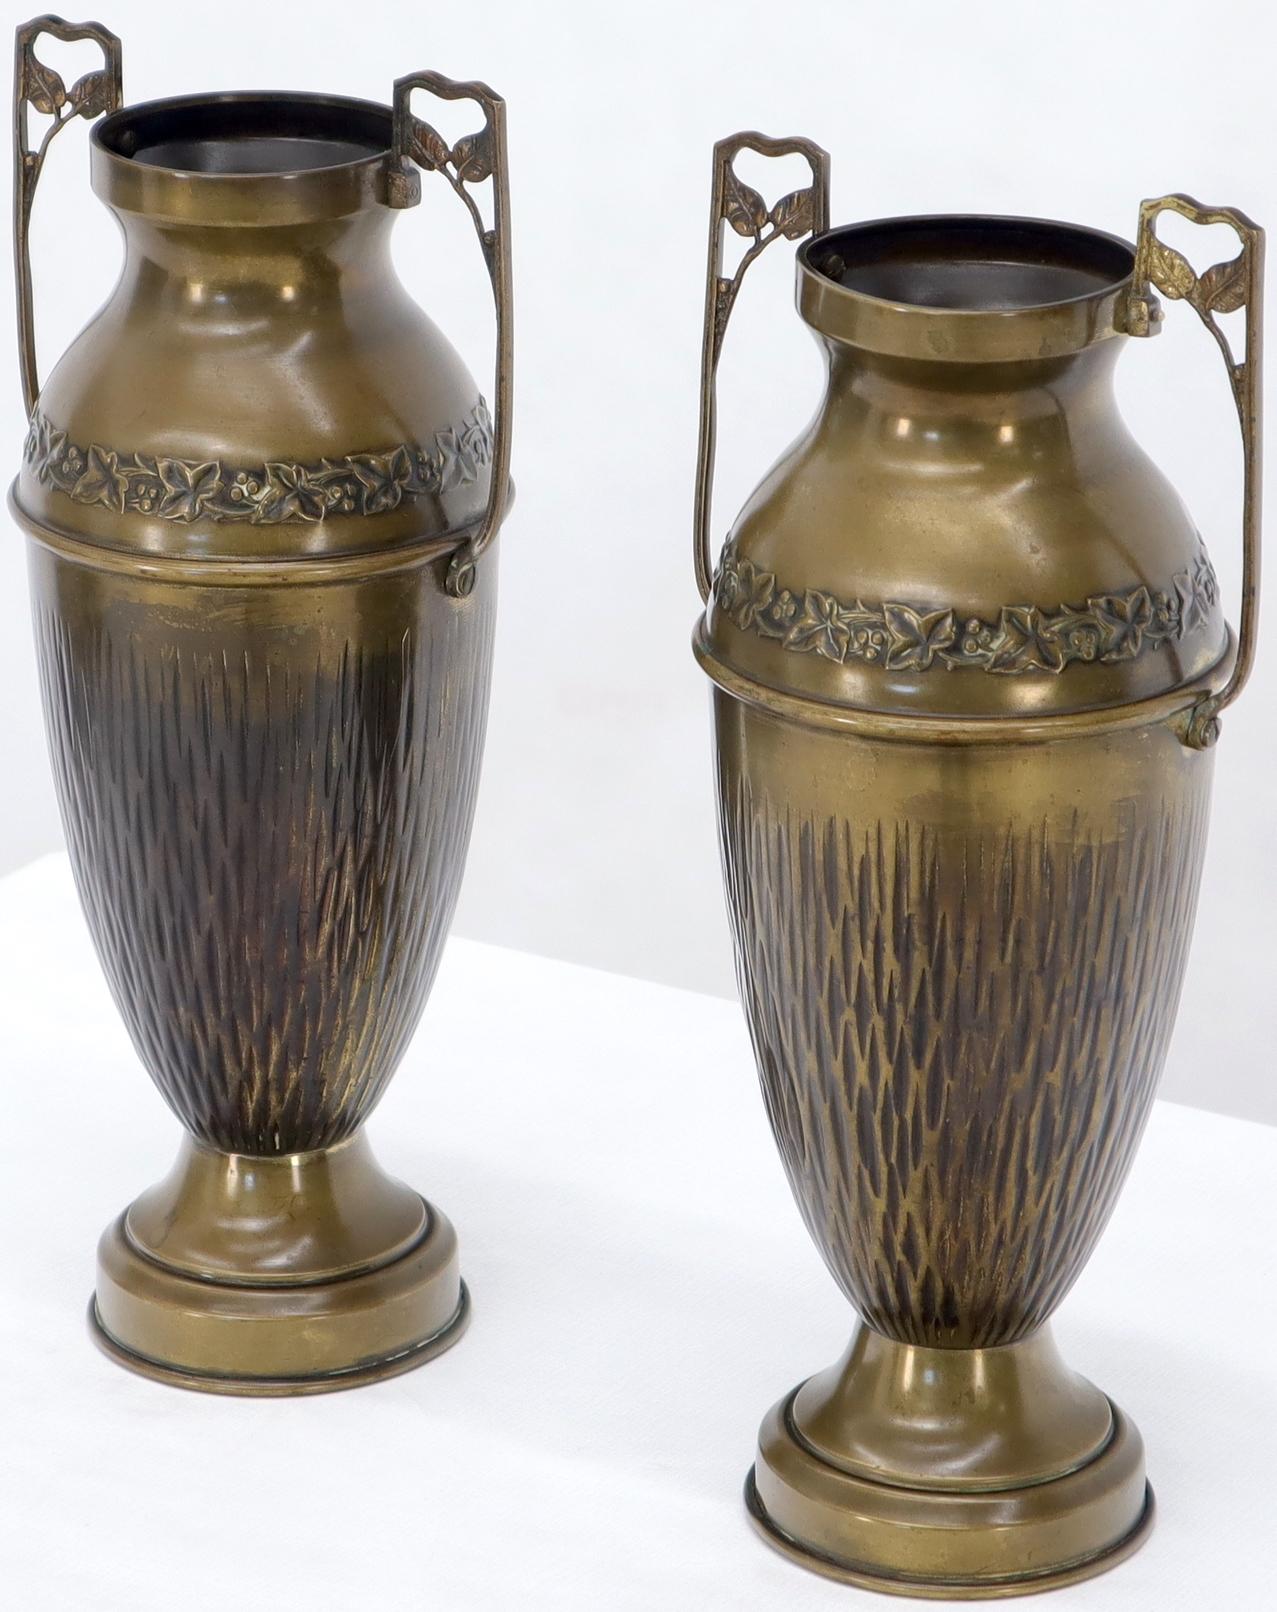 Pair of brass or bronze Bohemian or Art Nouveau style urn shape double handled vases.